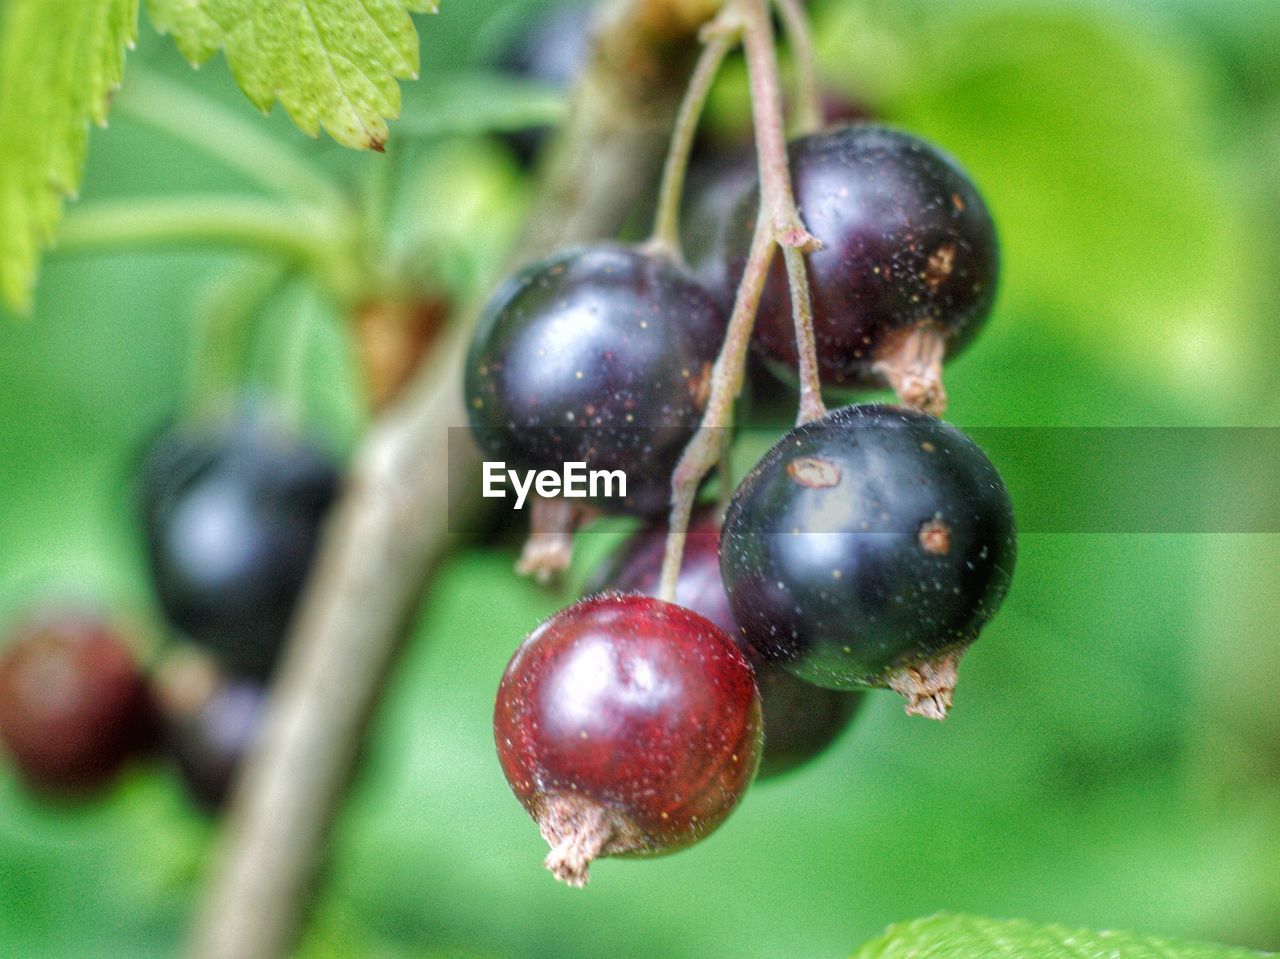 food, fruit, food and drink, healthy eating, freshness, berry, plant, close-up, wellbeing, produce, plant part, leaf, nature, growth, no people, ripe, green, tree, branch, agriculture, focus on foreground, outdoors, bilberry, shrub, macro photography, selective focus, day, cherry, hanging, flower, juicy, plant stem, organic, huckleberry